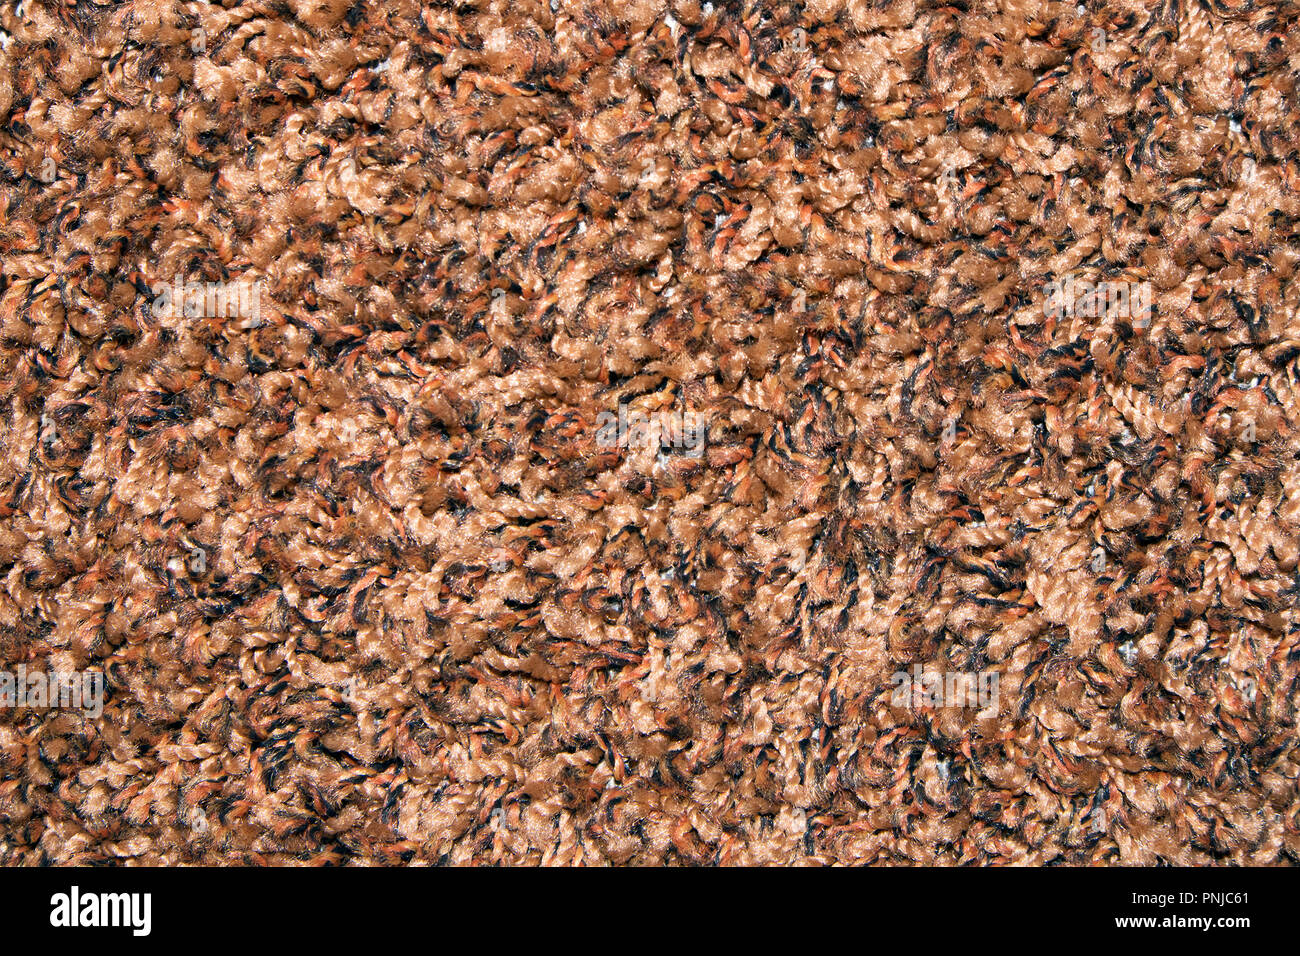 Brown synthetic short-napped floor carpet covering, may be used as background or texture Stock Photo